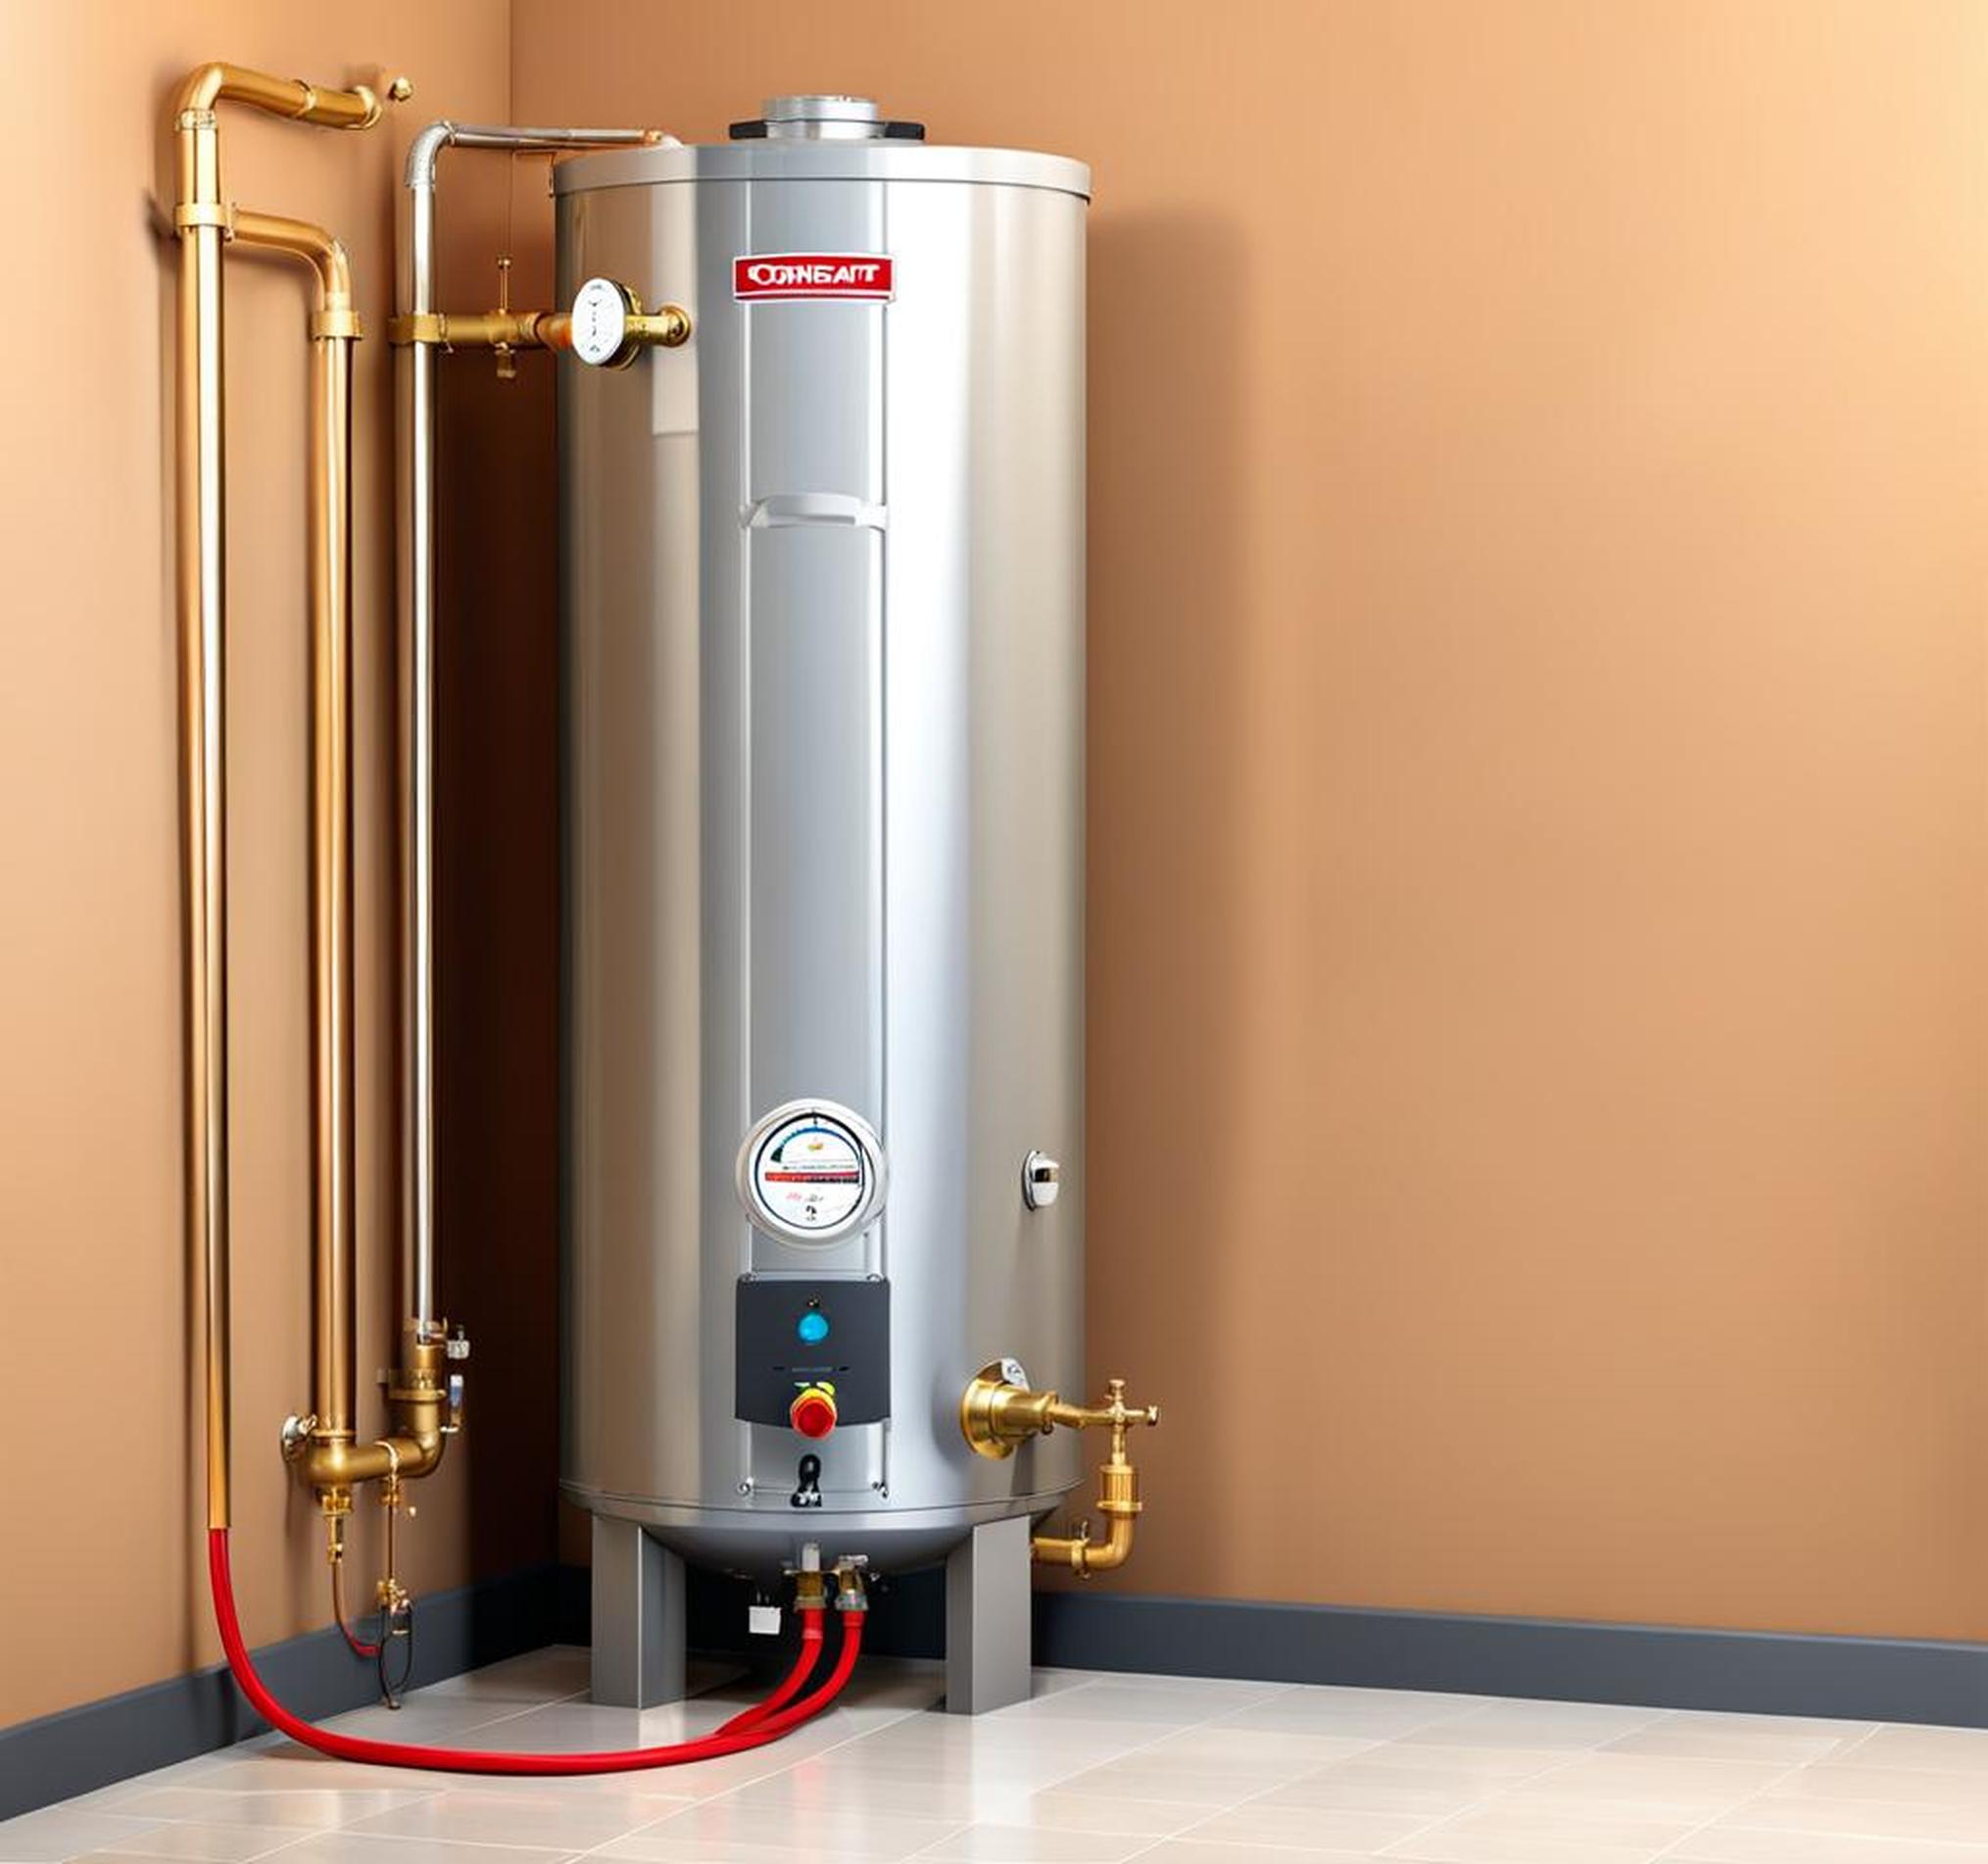 why does my hot water heater overflow keep discharging water